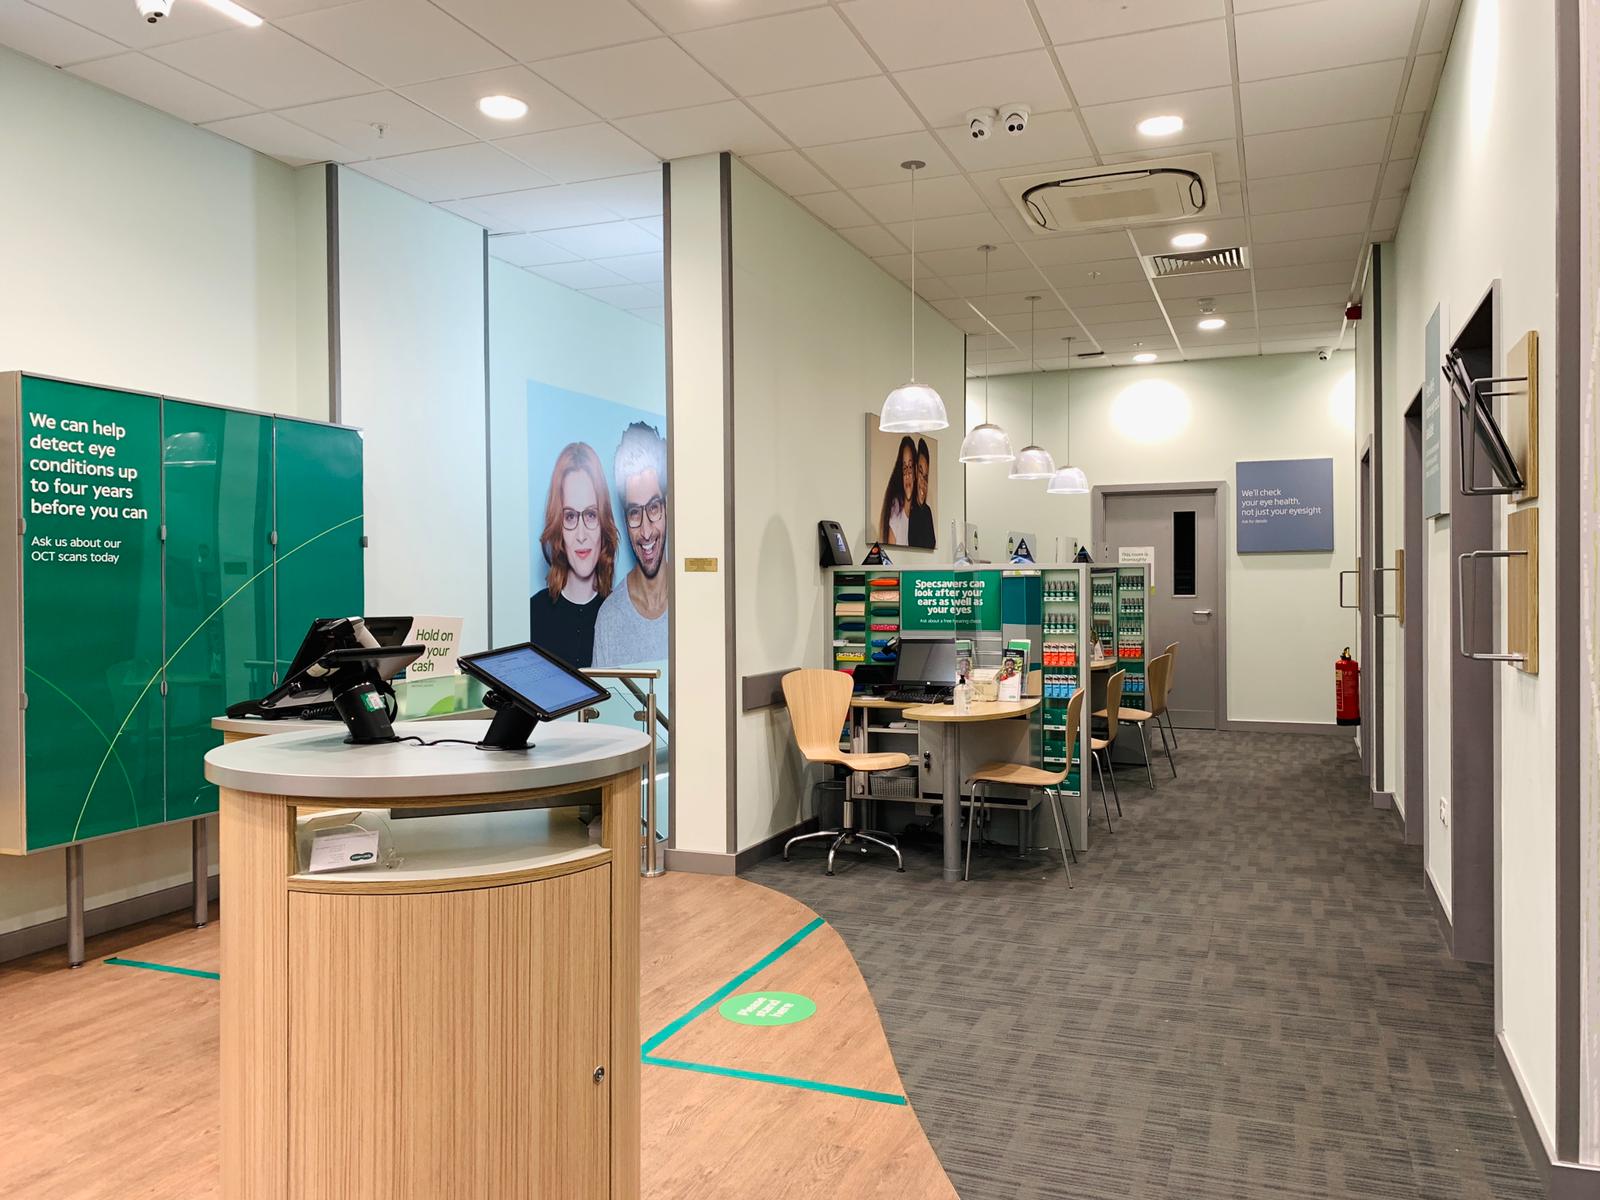 Specsavers Opticians and Audiologists - Hammersmith Hammersmith 020 8748 3233